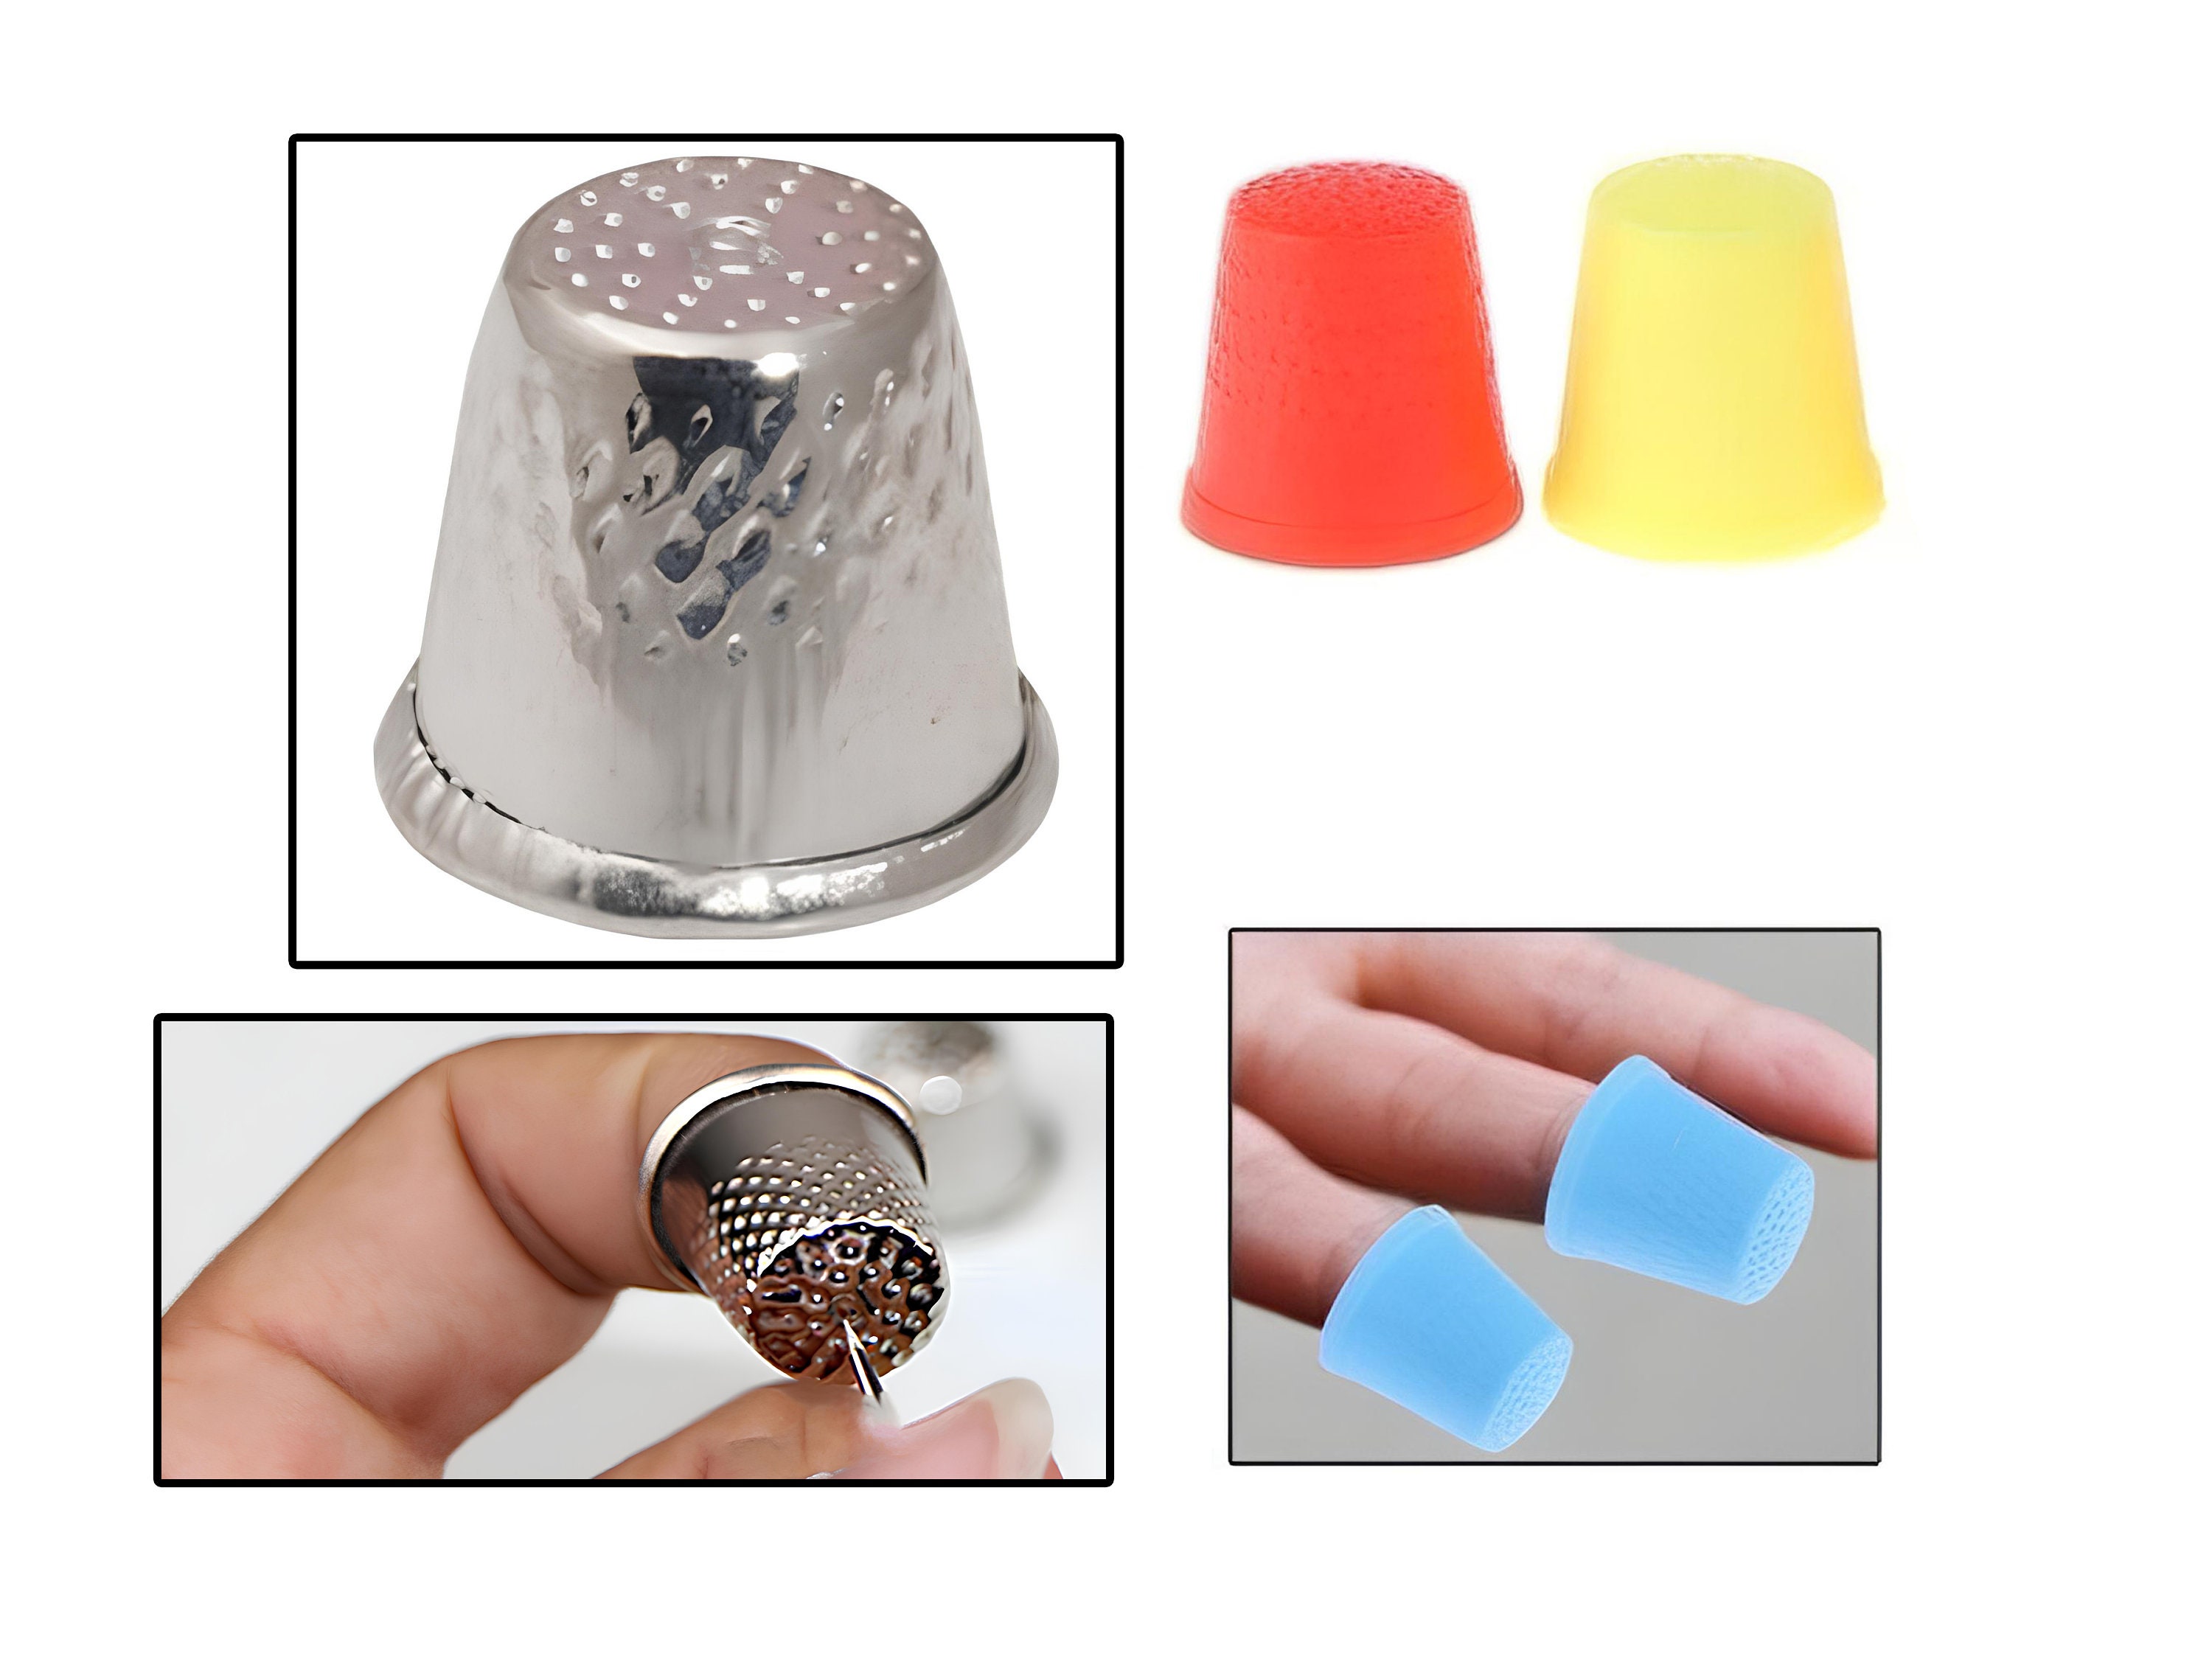 1pc Silicone Thimble Finger Protector - Non-Slip Quilting Craft Accessories  for Household Sewing & DIY Projects